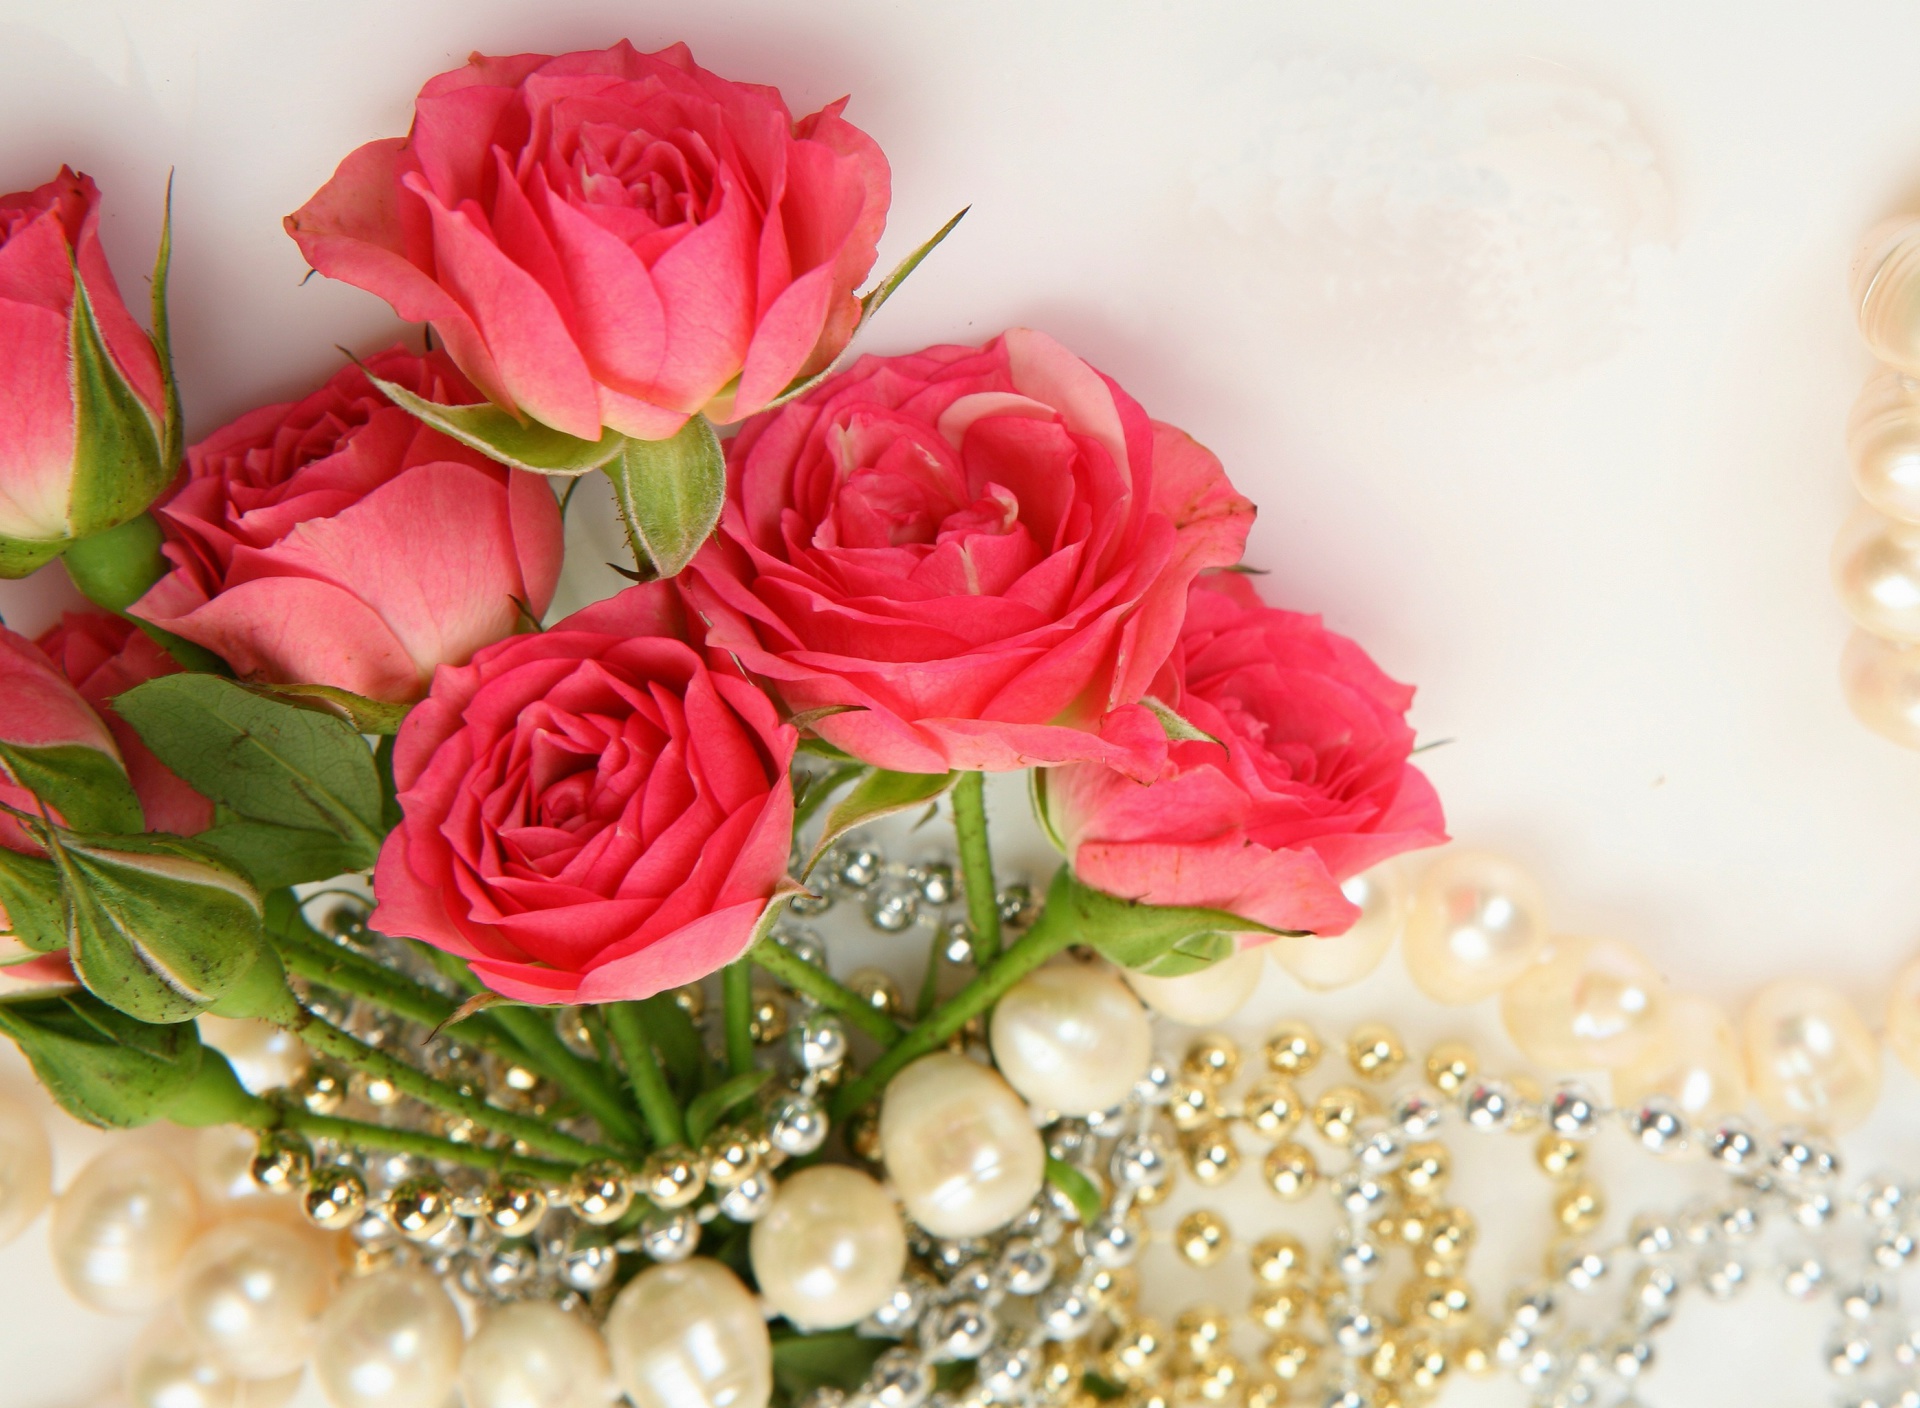 Necklace and Roses Bouquet wallpaper 1920x1408